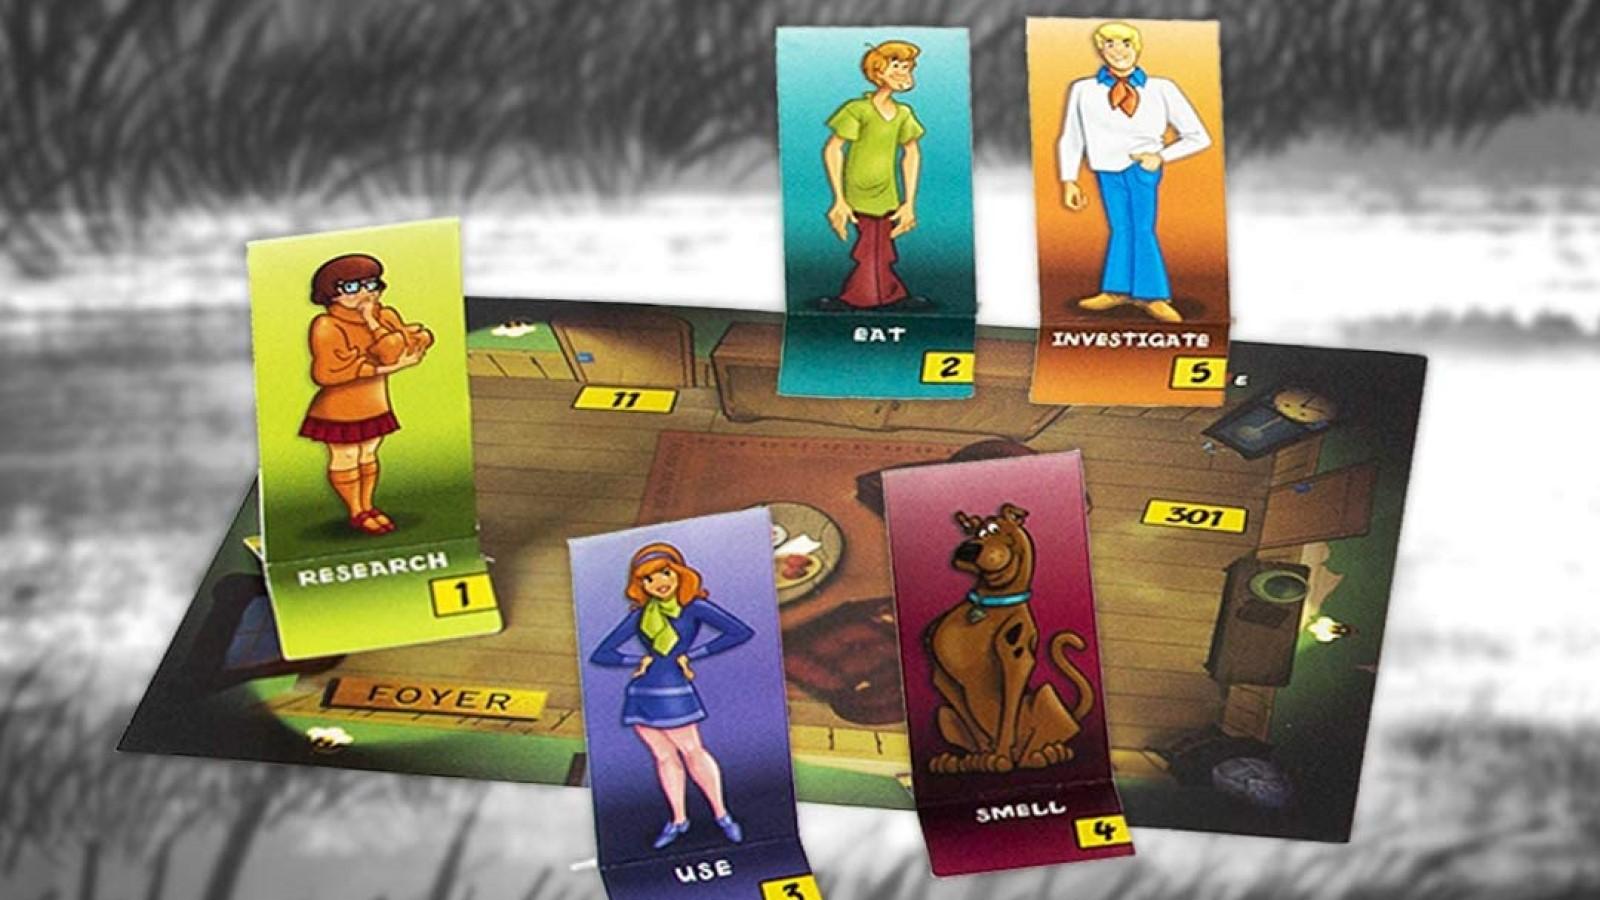 Escape Room Games - card standees showing the five main characters from Scooby-Doo (Scooby, Velma, Daphne, Fred, and Shaggy)